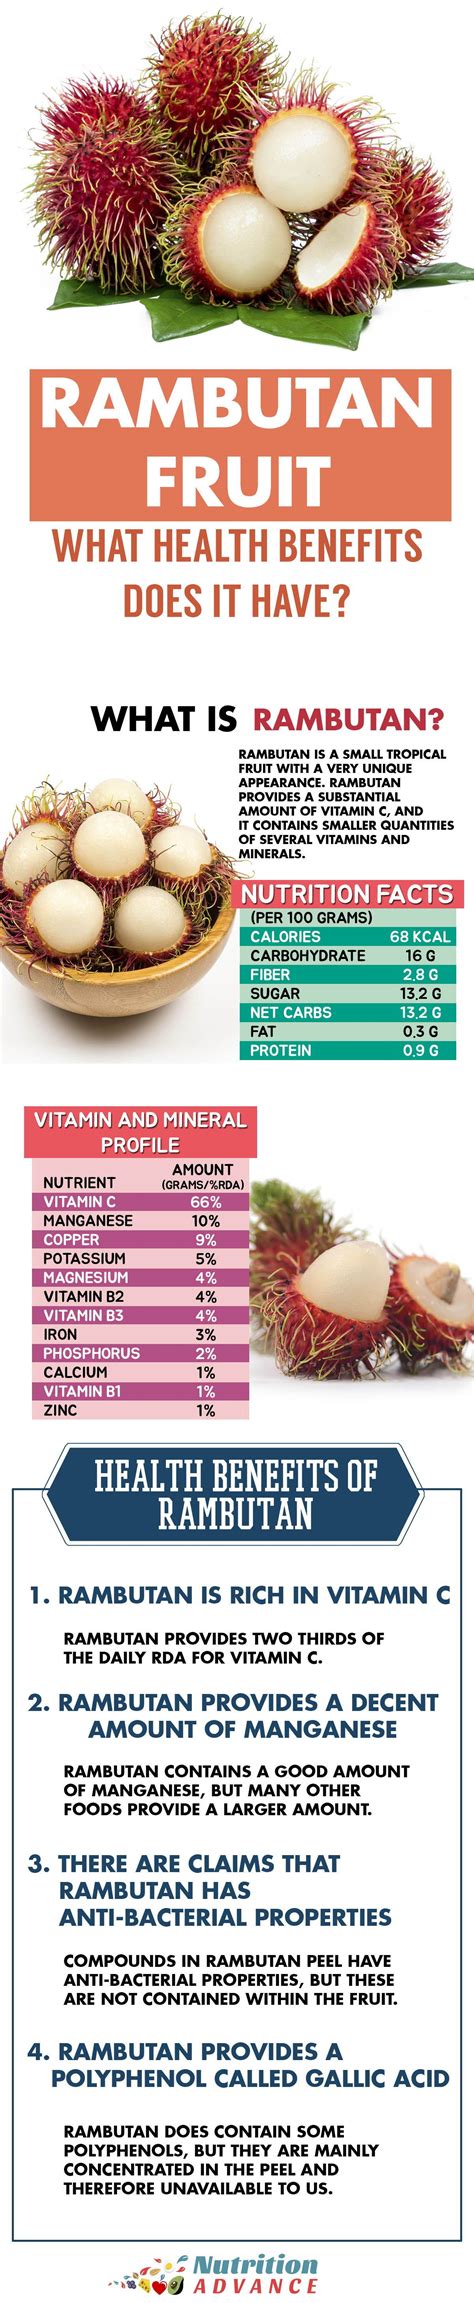 Rambutan Fruit 101: Nutrition Profile, Health Benefits, Facts and Myths ...